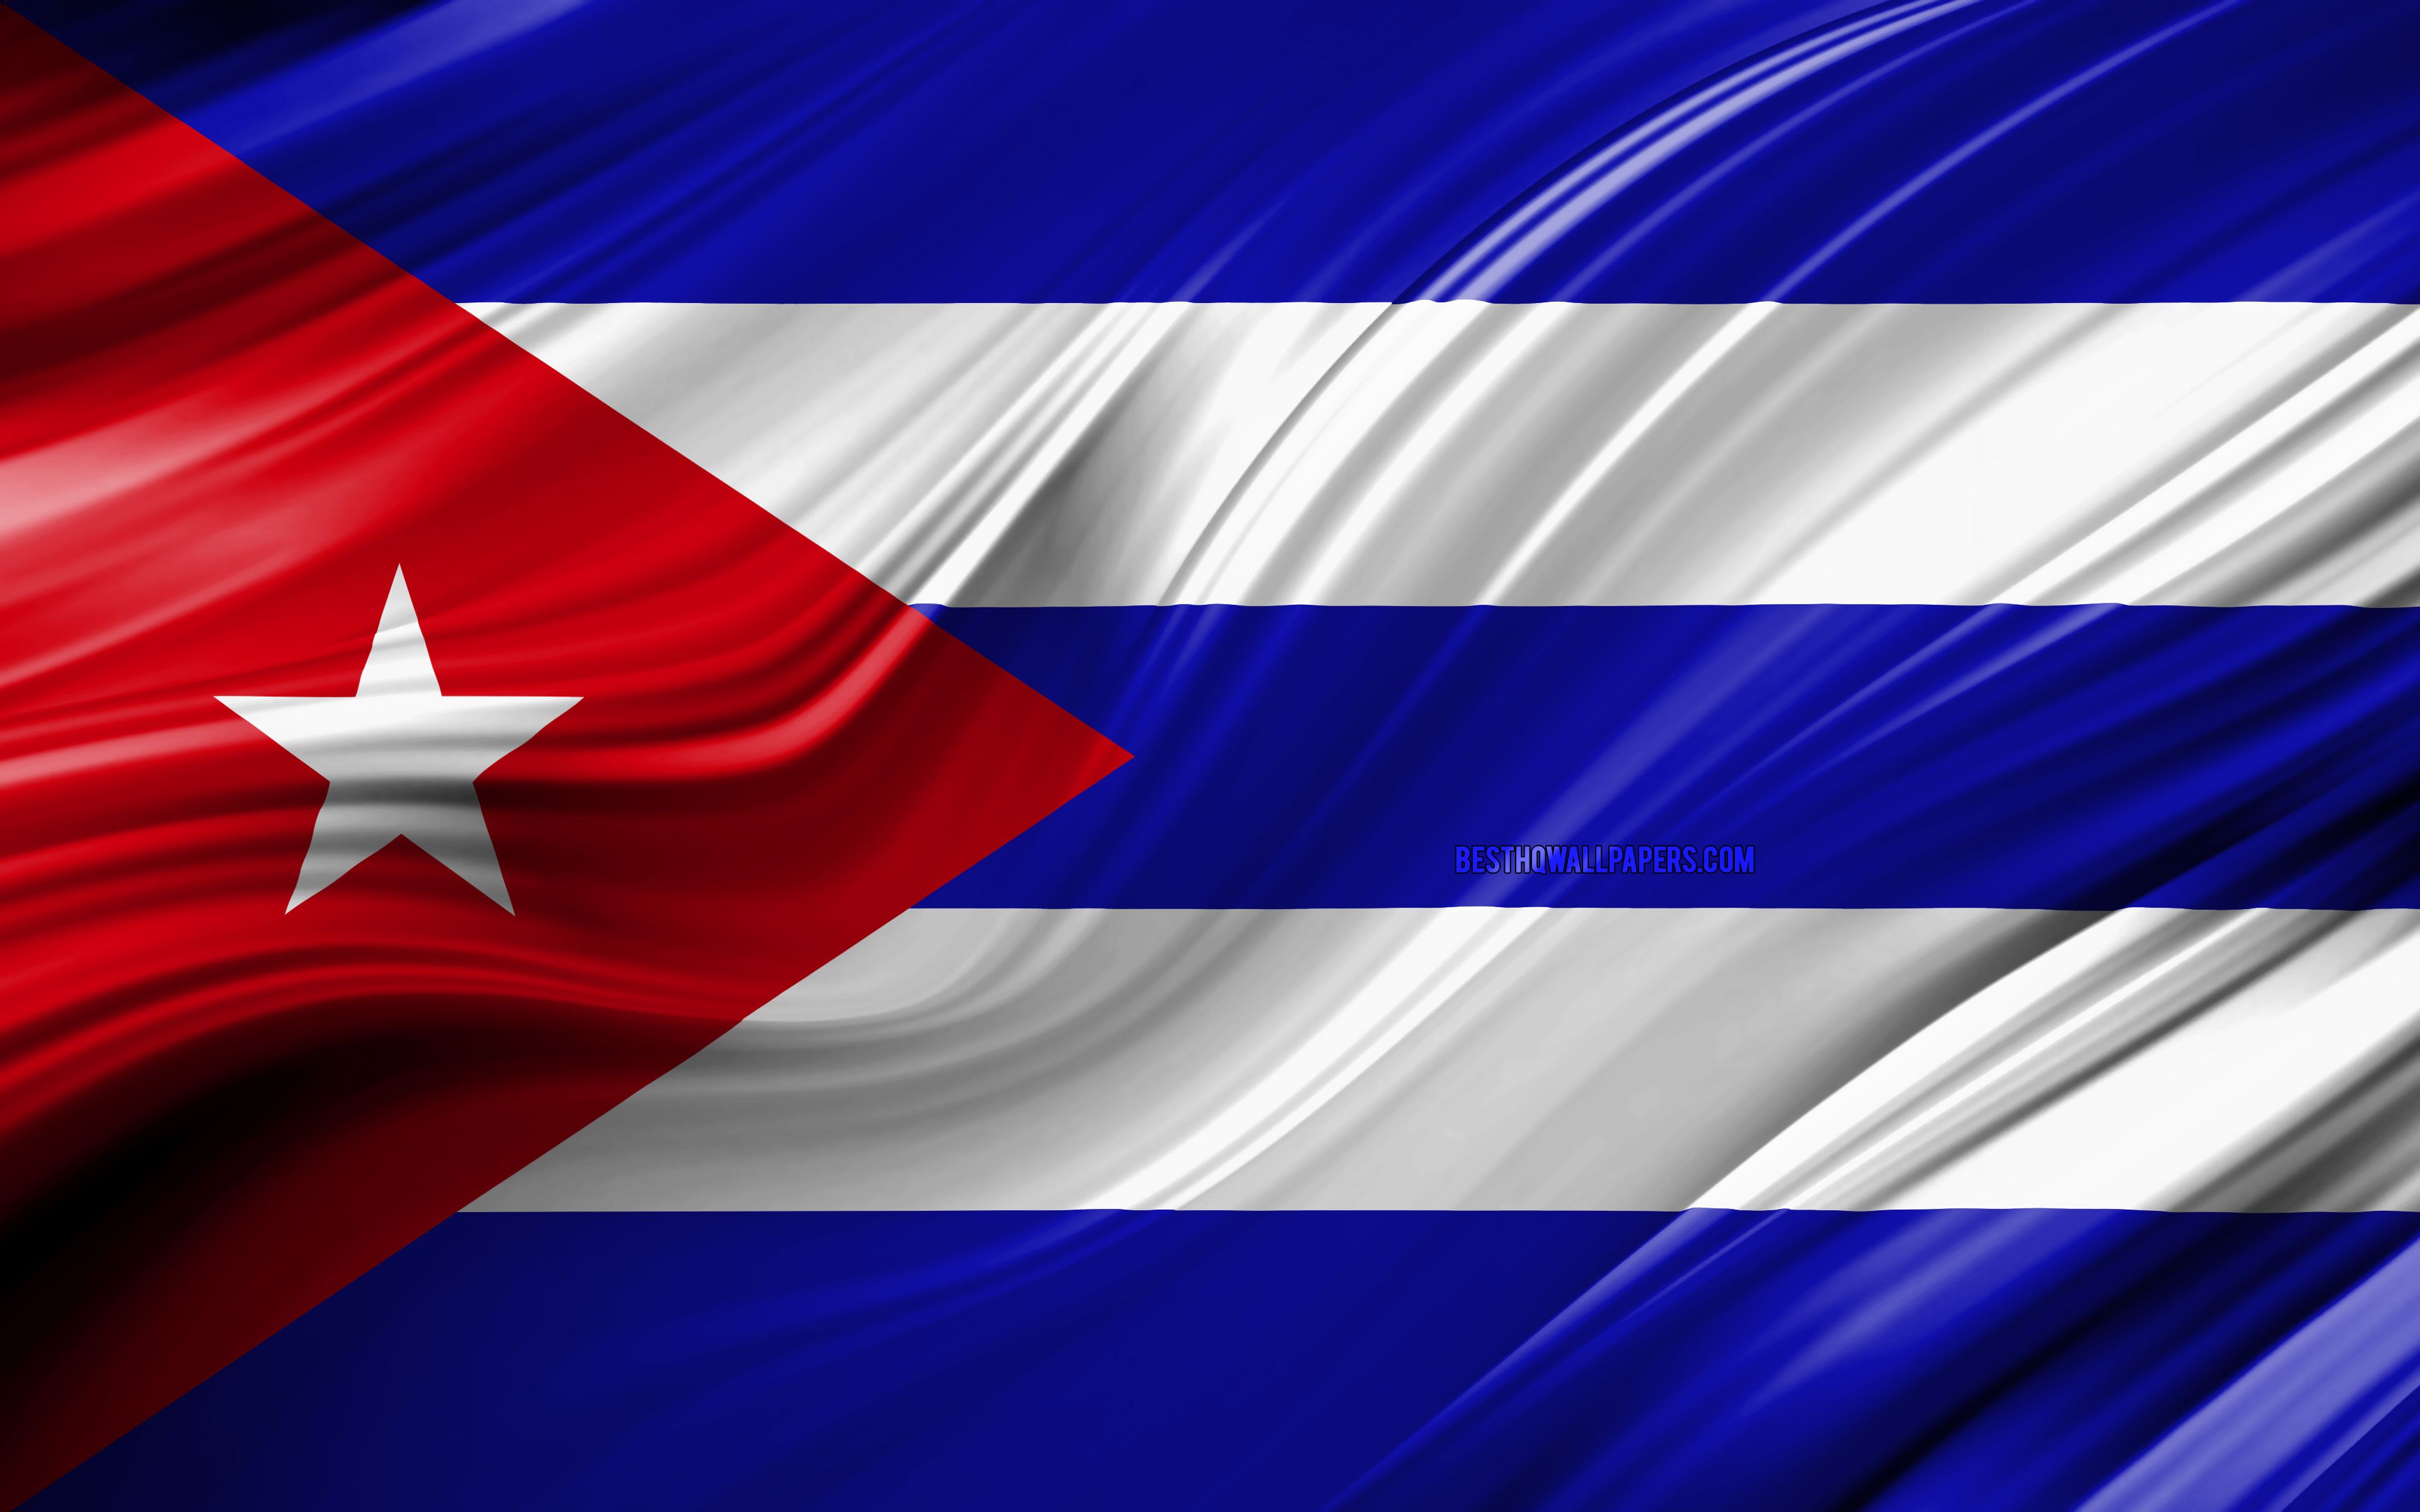 Download wallpaper 4k, Cuban flag, North American countries, 3D waves, Flag of Cuba, national symbols, Cuba 3D flag, art, North America, Cuba for desktop with resolution 3840x2400. High Quality HD picture wallpaper